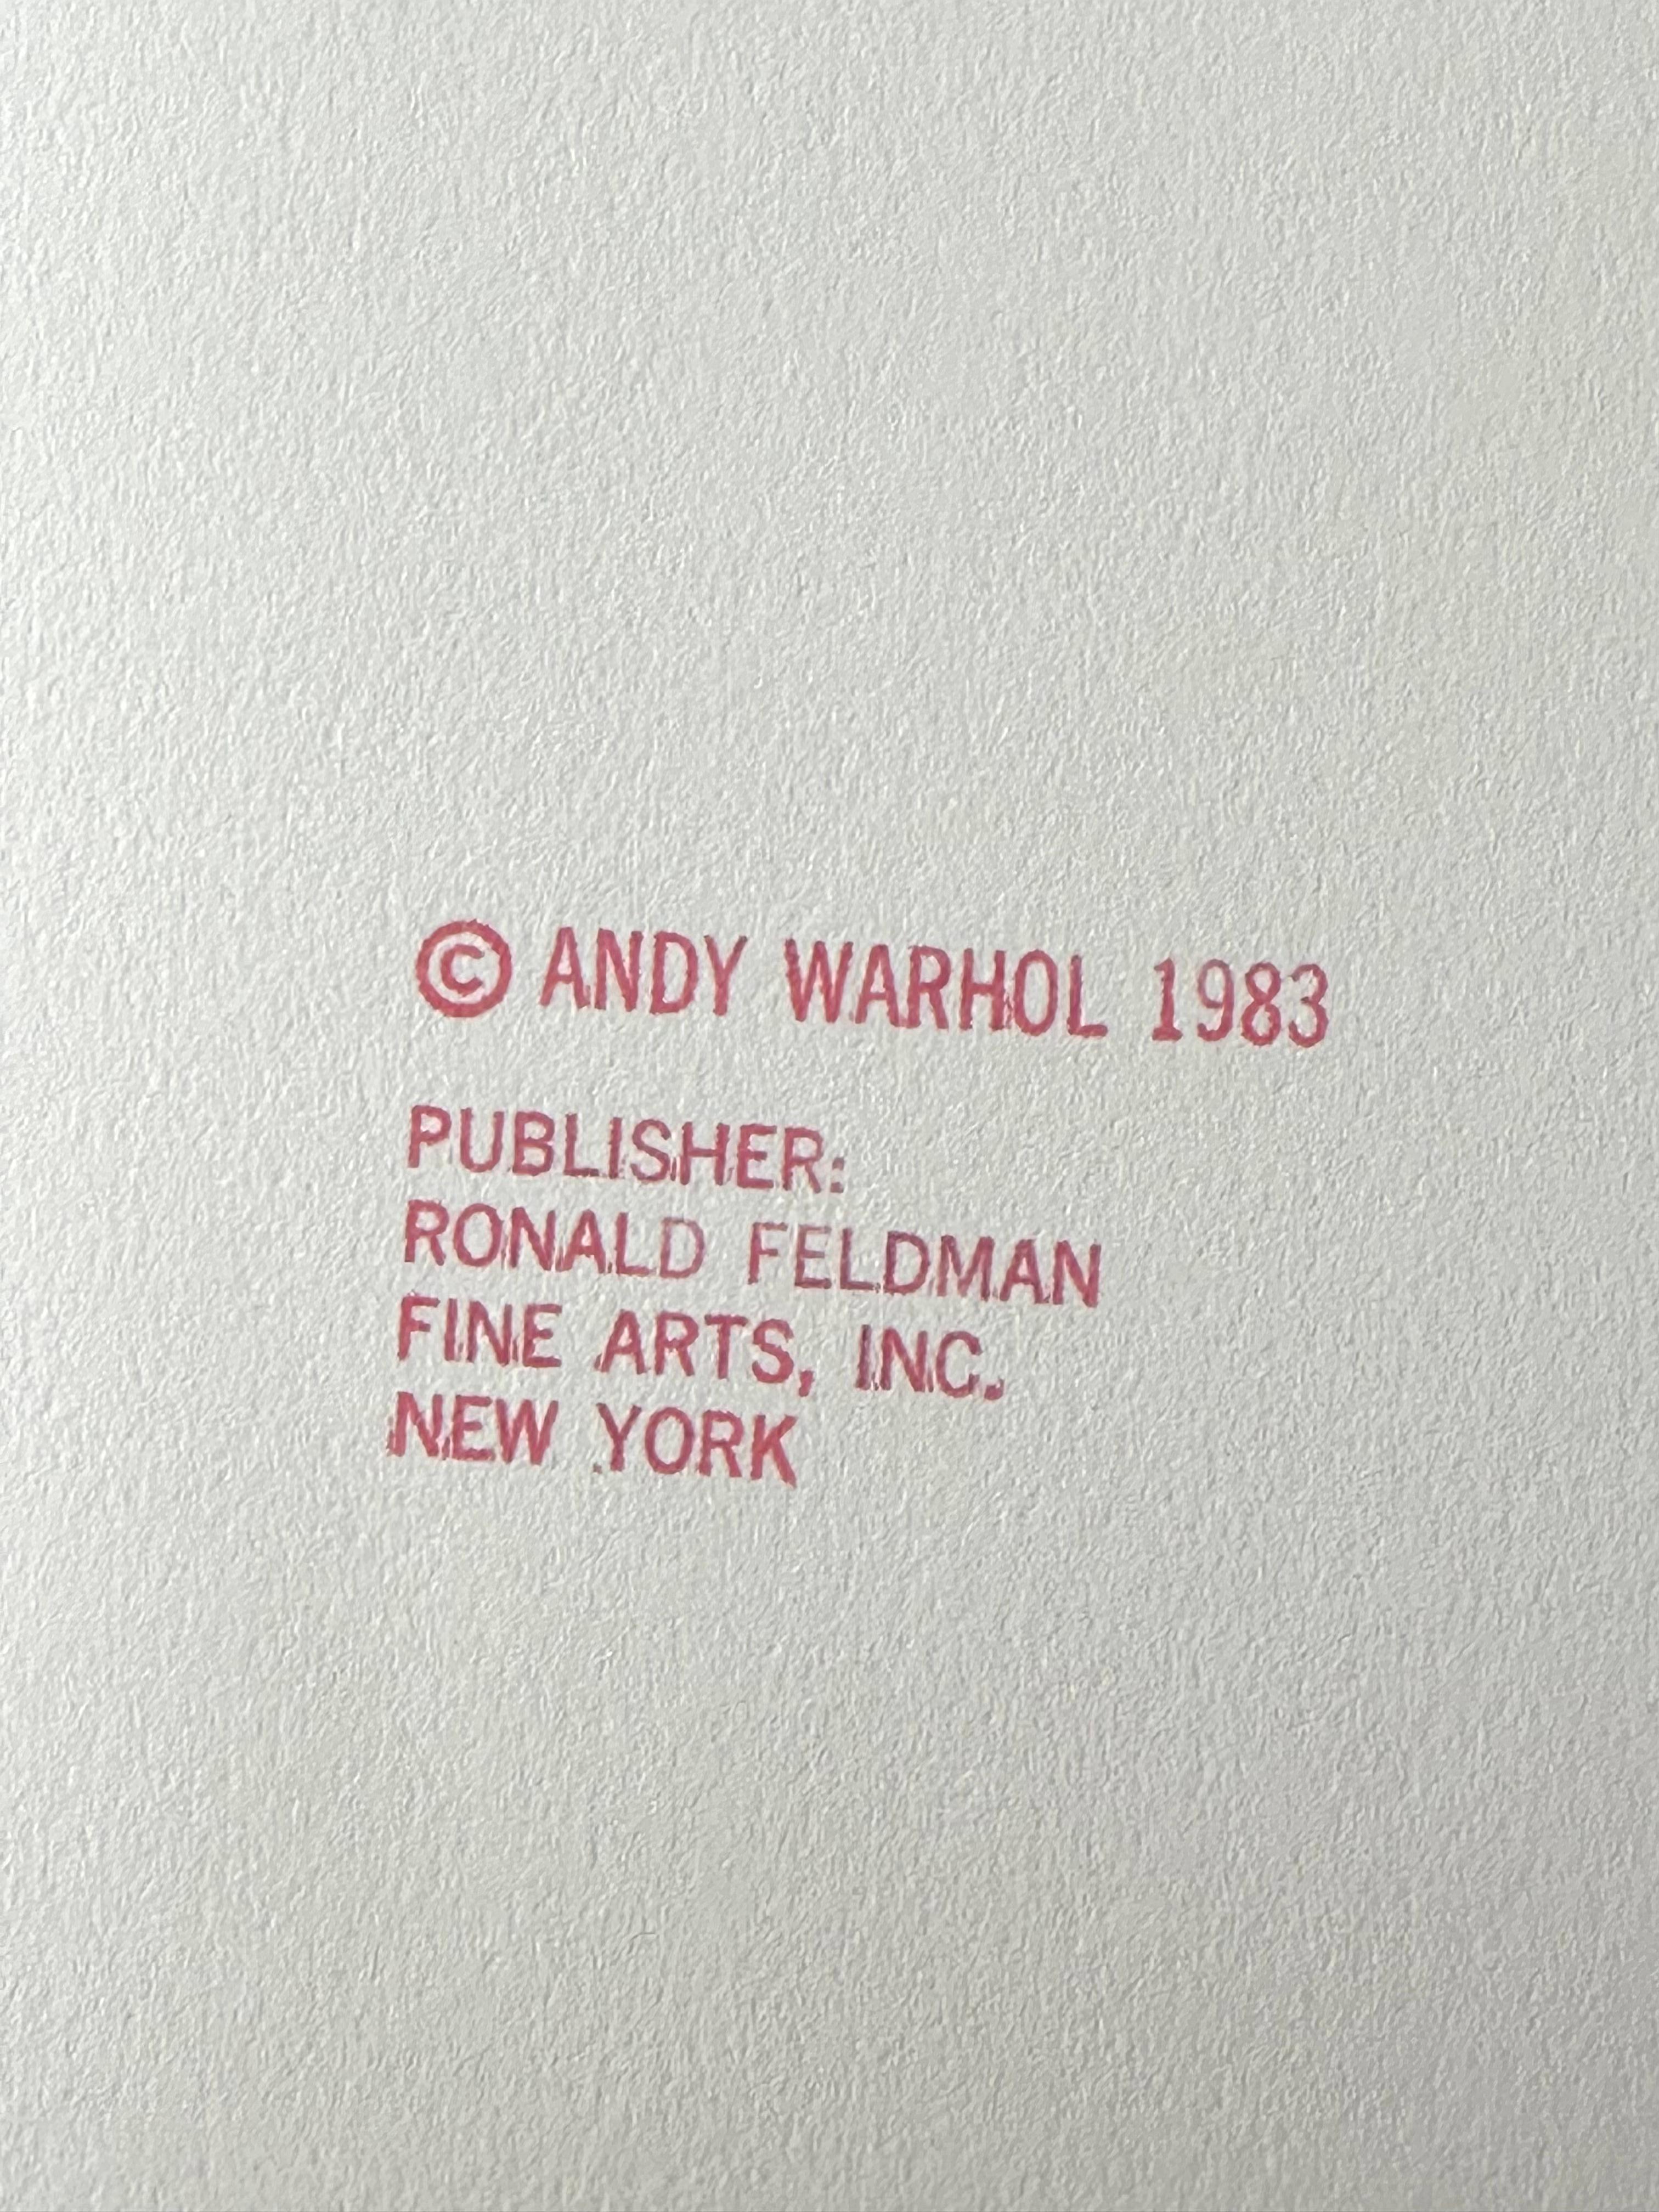 From the edition of 30 AP. The specific edition number will only be provided to the buyer at the actual point of sale. Please message us to request this information at the point of purchase.

Warhol created his Endangered Species portfolio of ten,